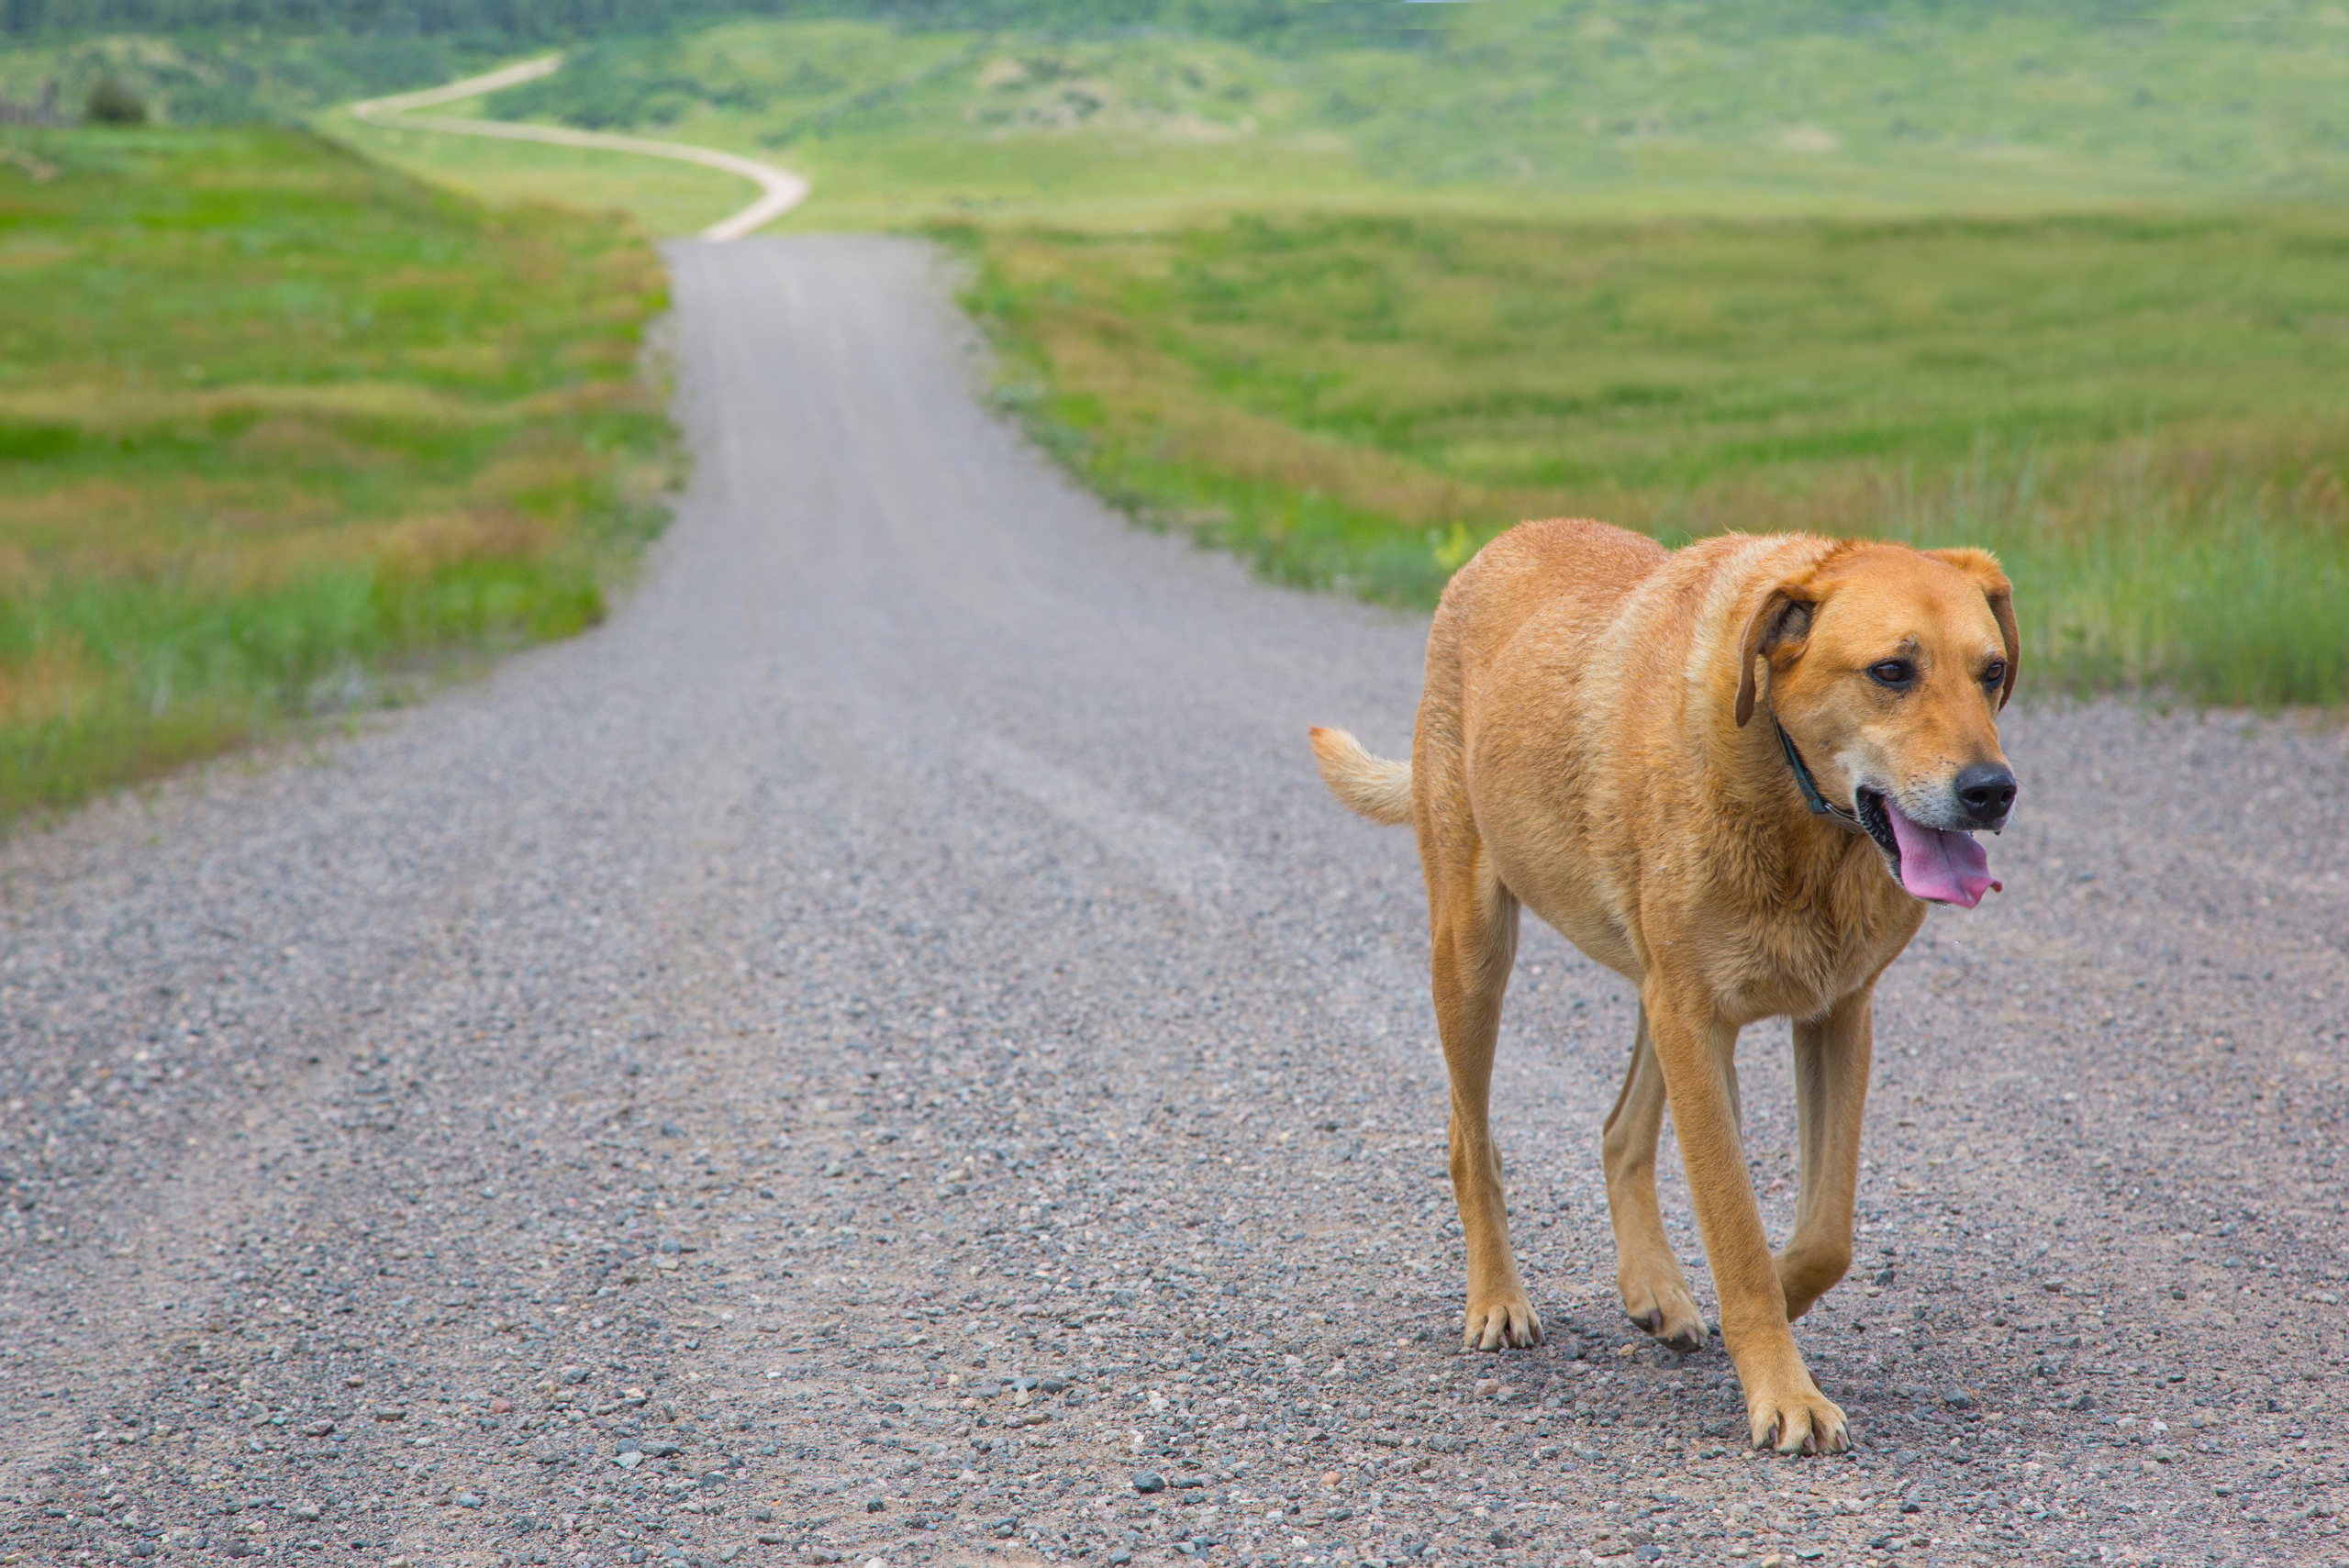 Finding Fido: Recommended Steps to Recover or Reunite a Lost Dog